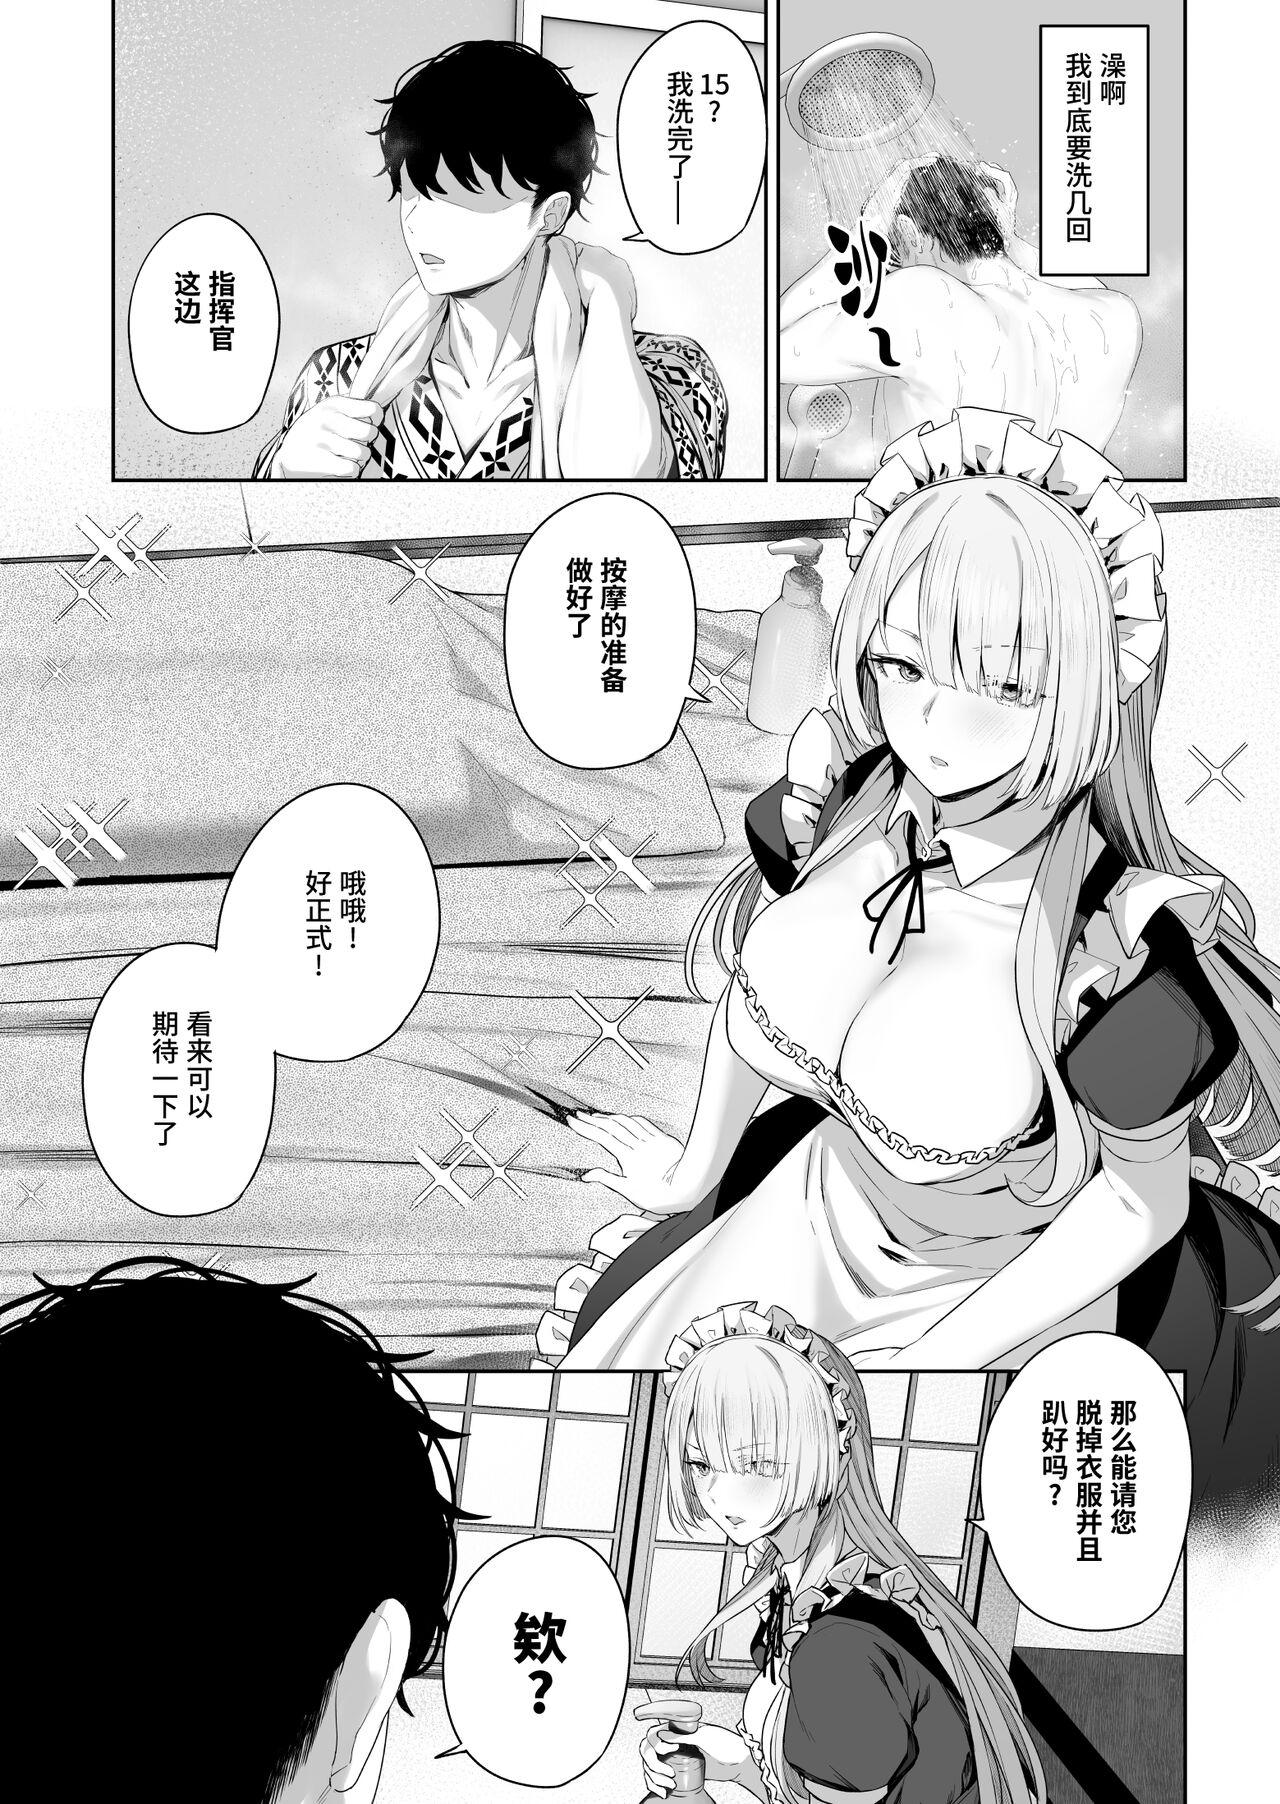 Price AK15の進捗1 - Girls frontline Massages - Page 3